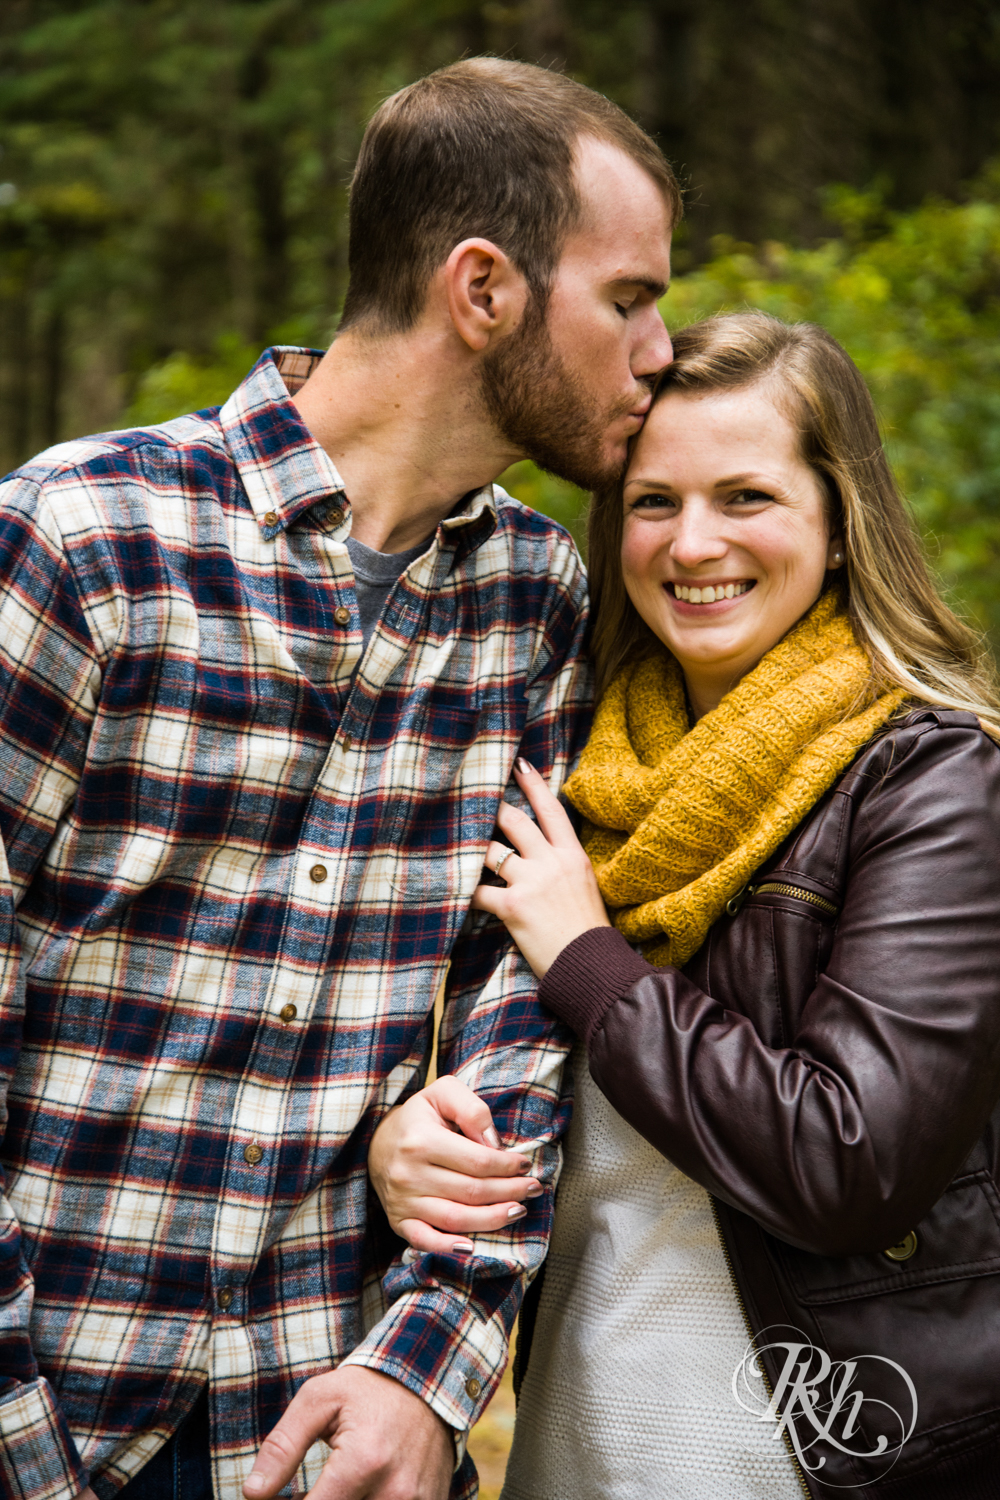 Man in flannel and woman in yellow scarf smile and kiss at Lebanon Hills Regional Park in Eagan, Minnesota.